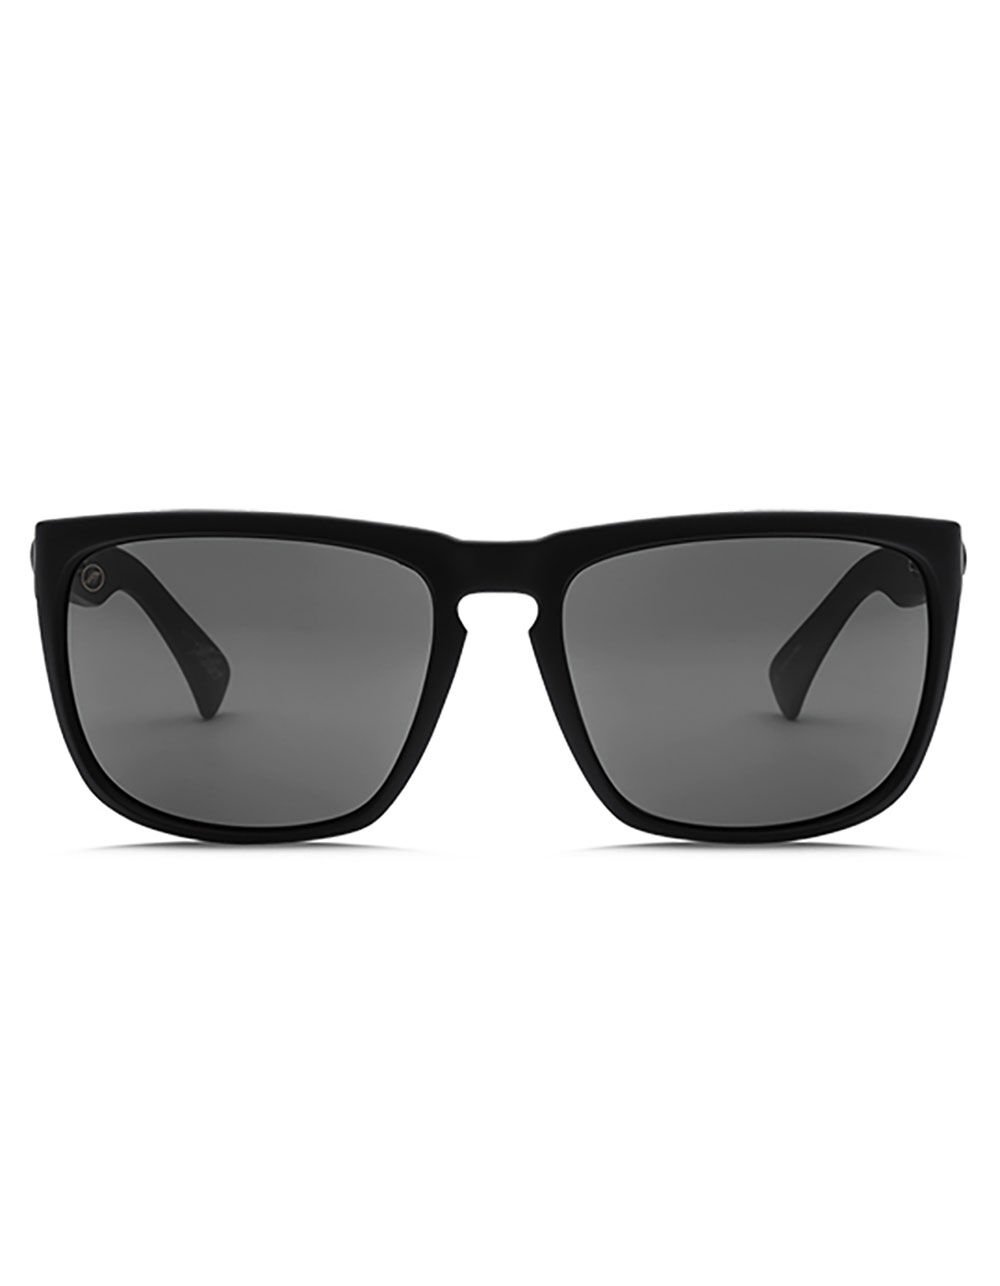 ELECTRIC Knoxville XL Polarized Matte Black Sunglasses image number 1